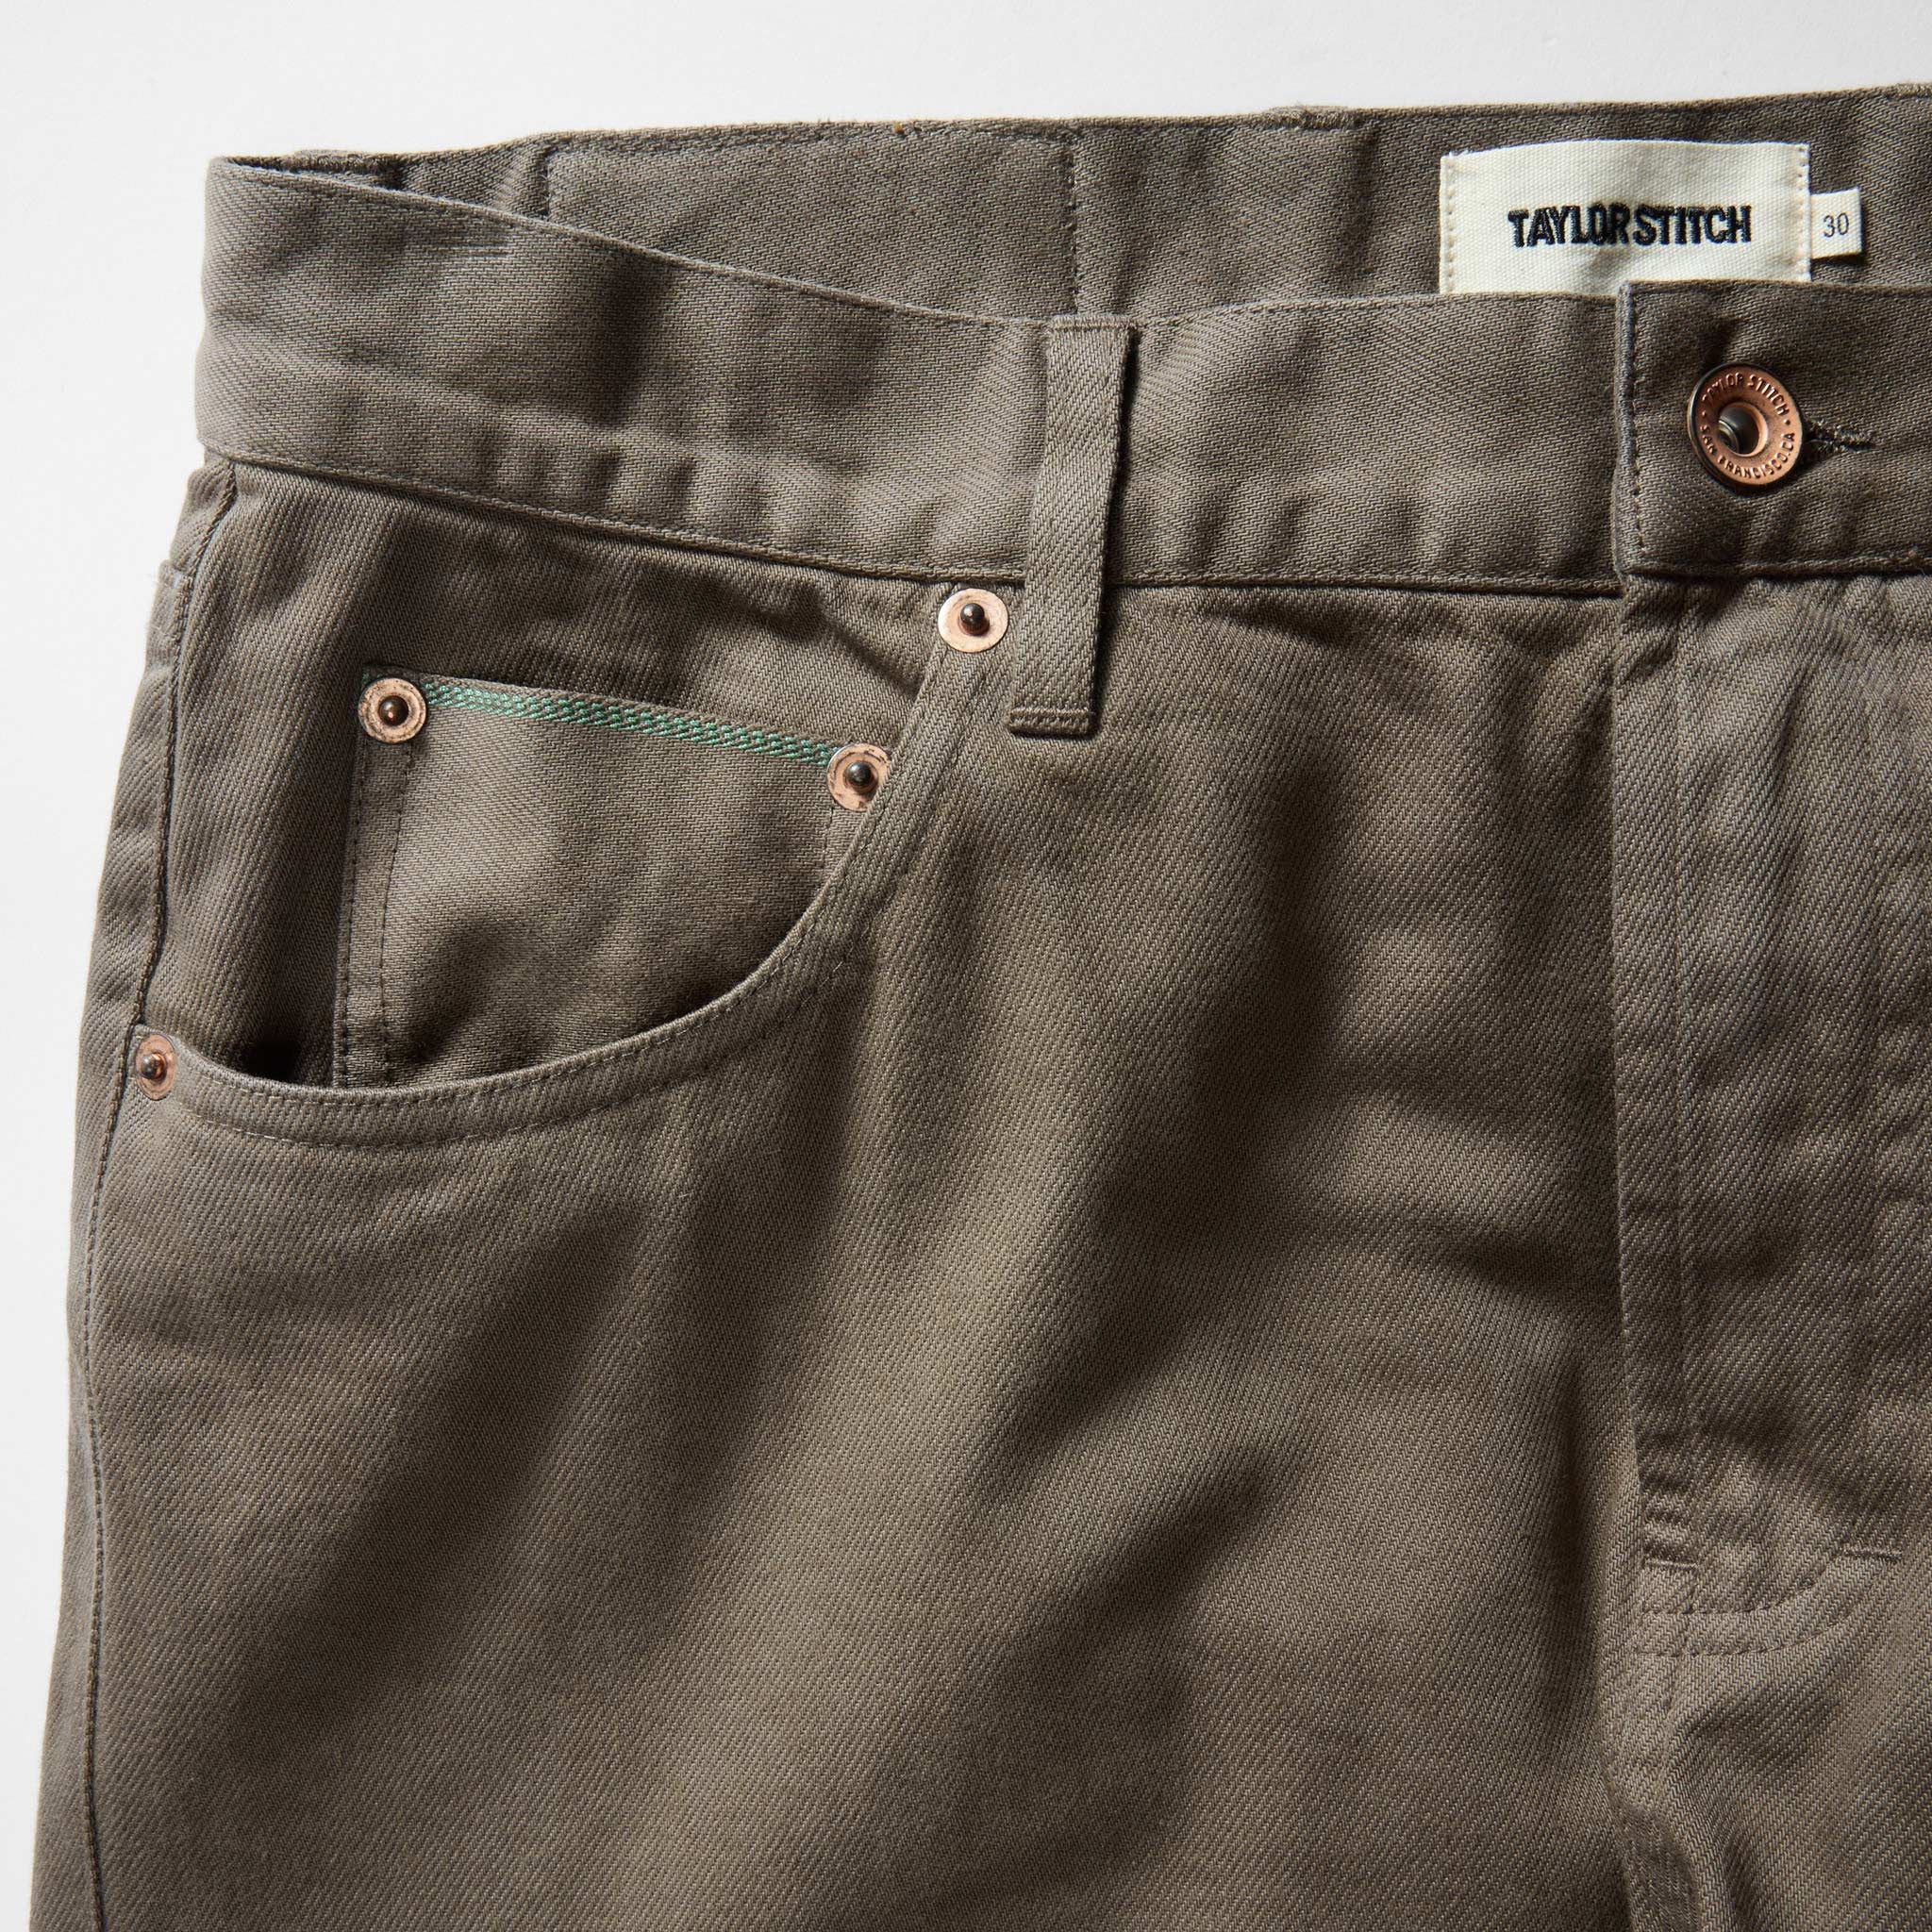 The Slim All Day Pant in Fatigue Olive Selvage Denim